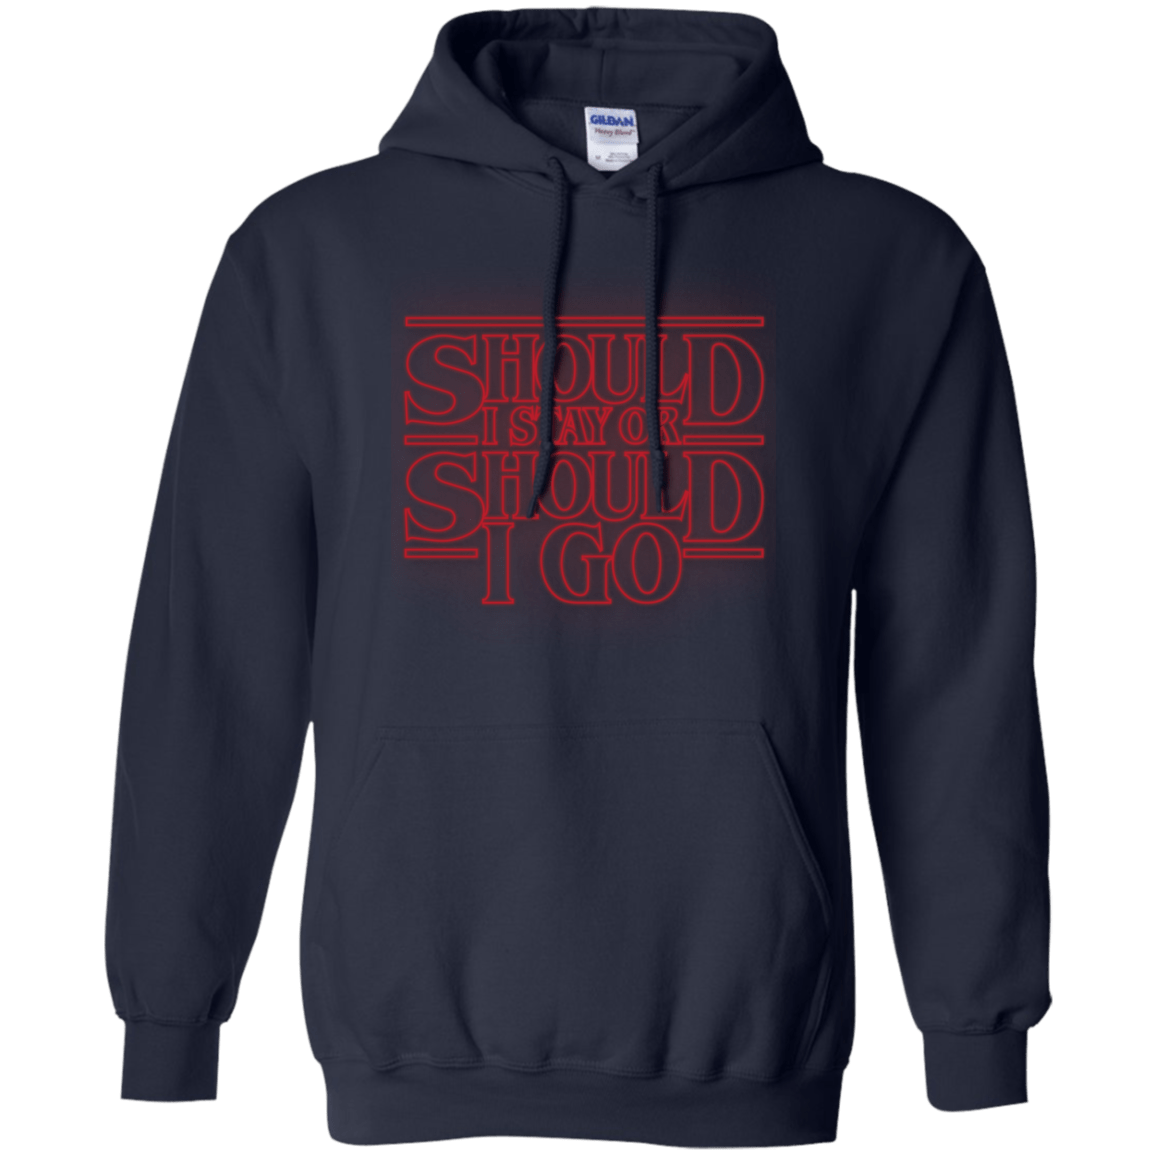 Sweatshirts Navy / Small Should I Stay Or Should I Go Pullover Hoodie